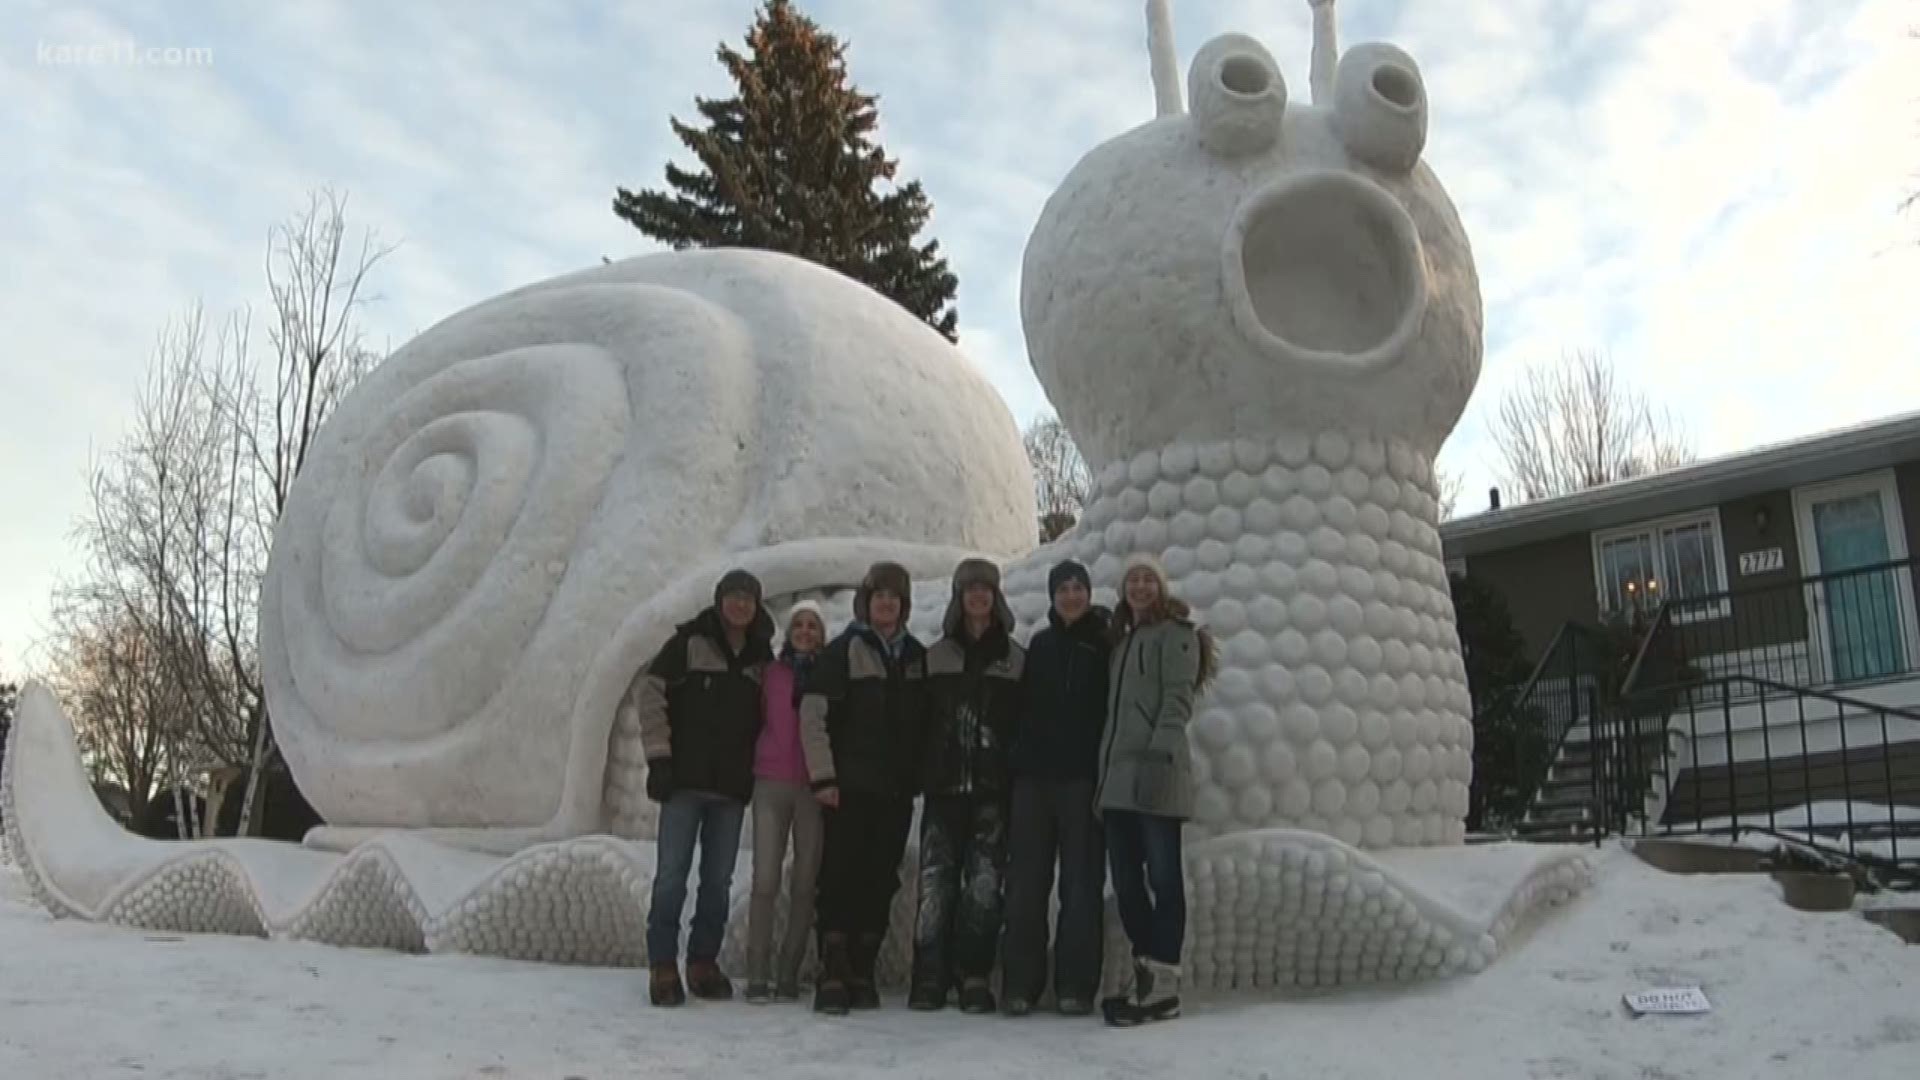 A giant snow creation in New Brighton is bigger  and better than ever this year.
A trio of brothers show off their creativity putting it together but its more than just a great photo opp
Kent Erdahl went to check it out today.